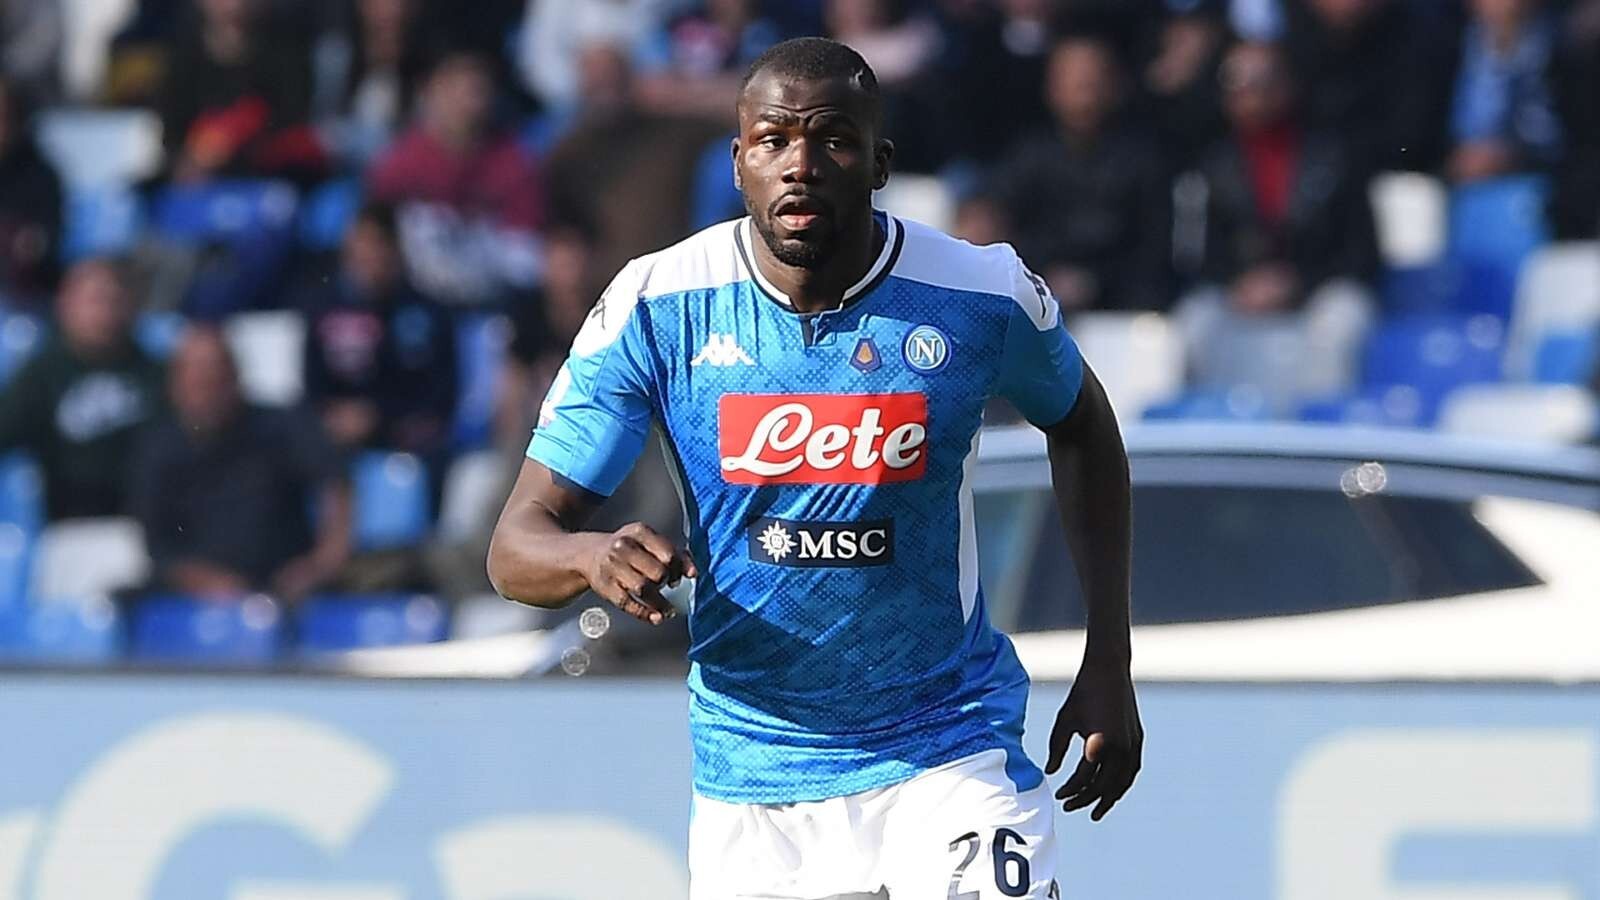 Leboeuf Believes Koulibaly Would Be a Great Fit at Chelsea